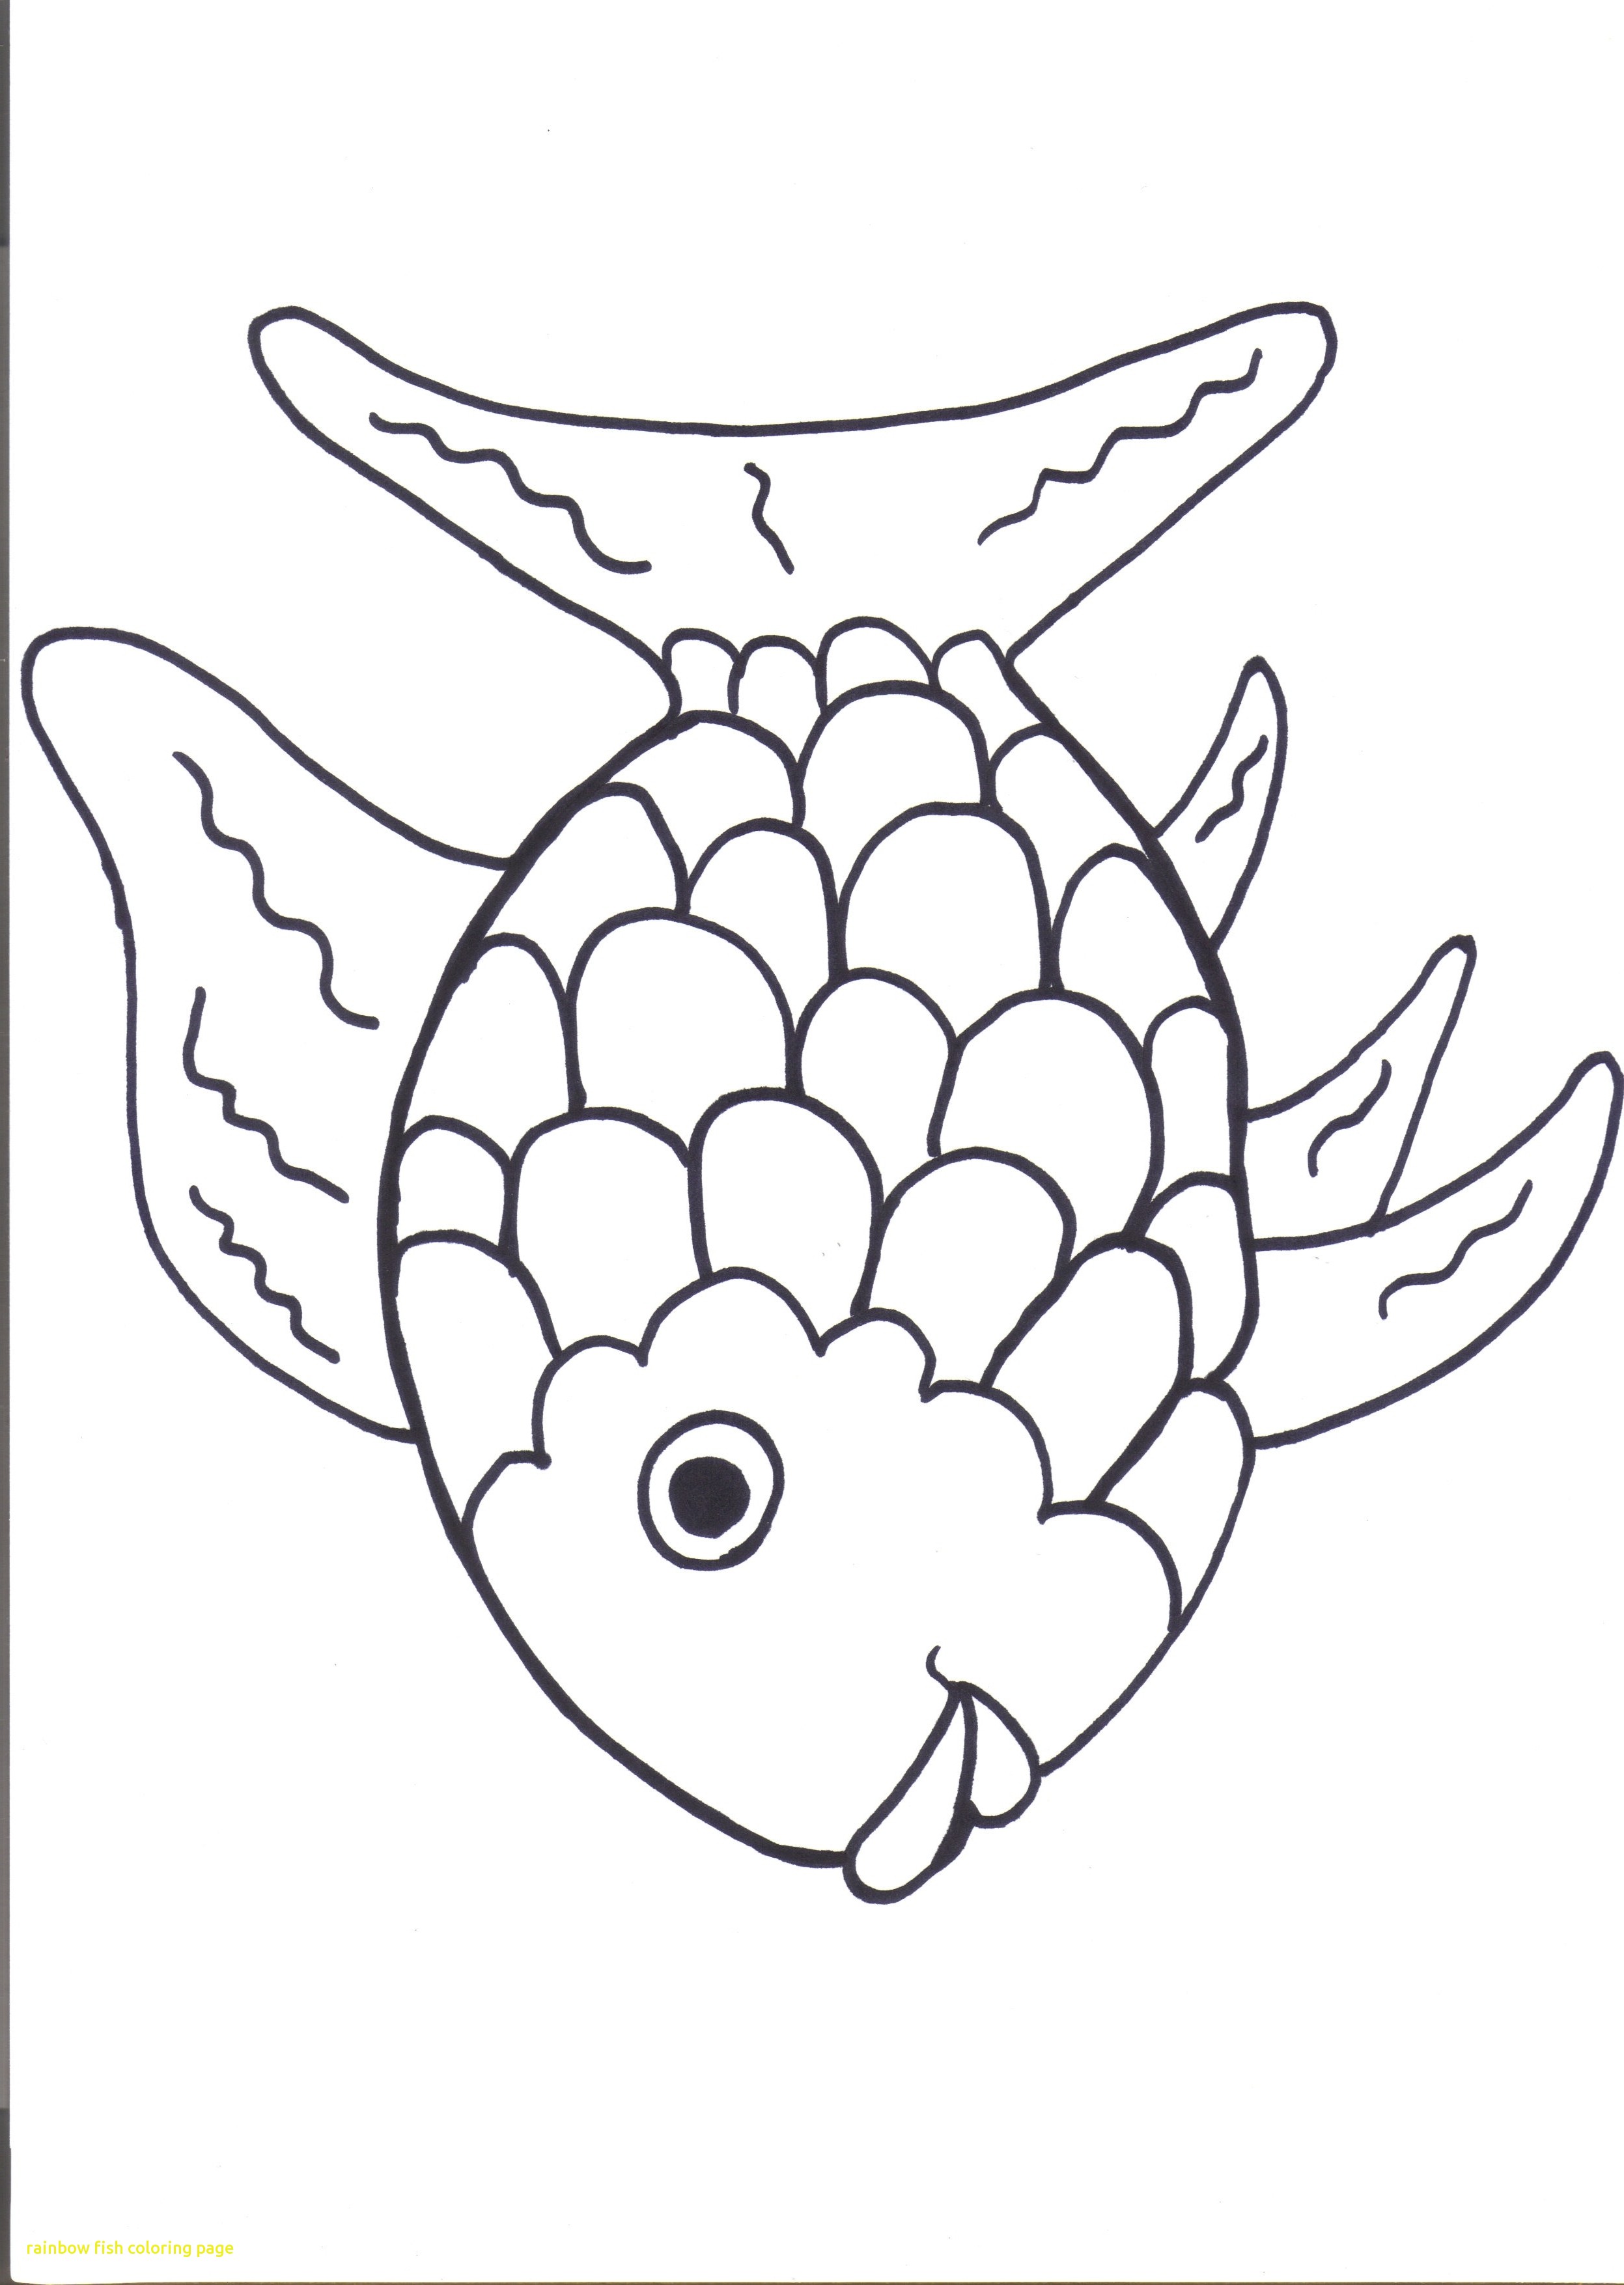 download-these-free-rainbow-fish-coloring-pages-for-kids